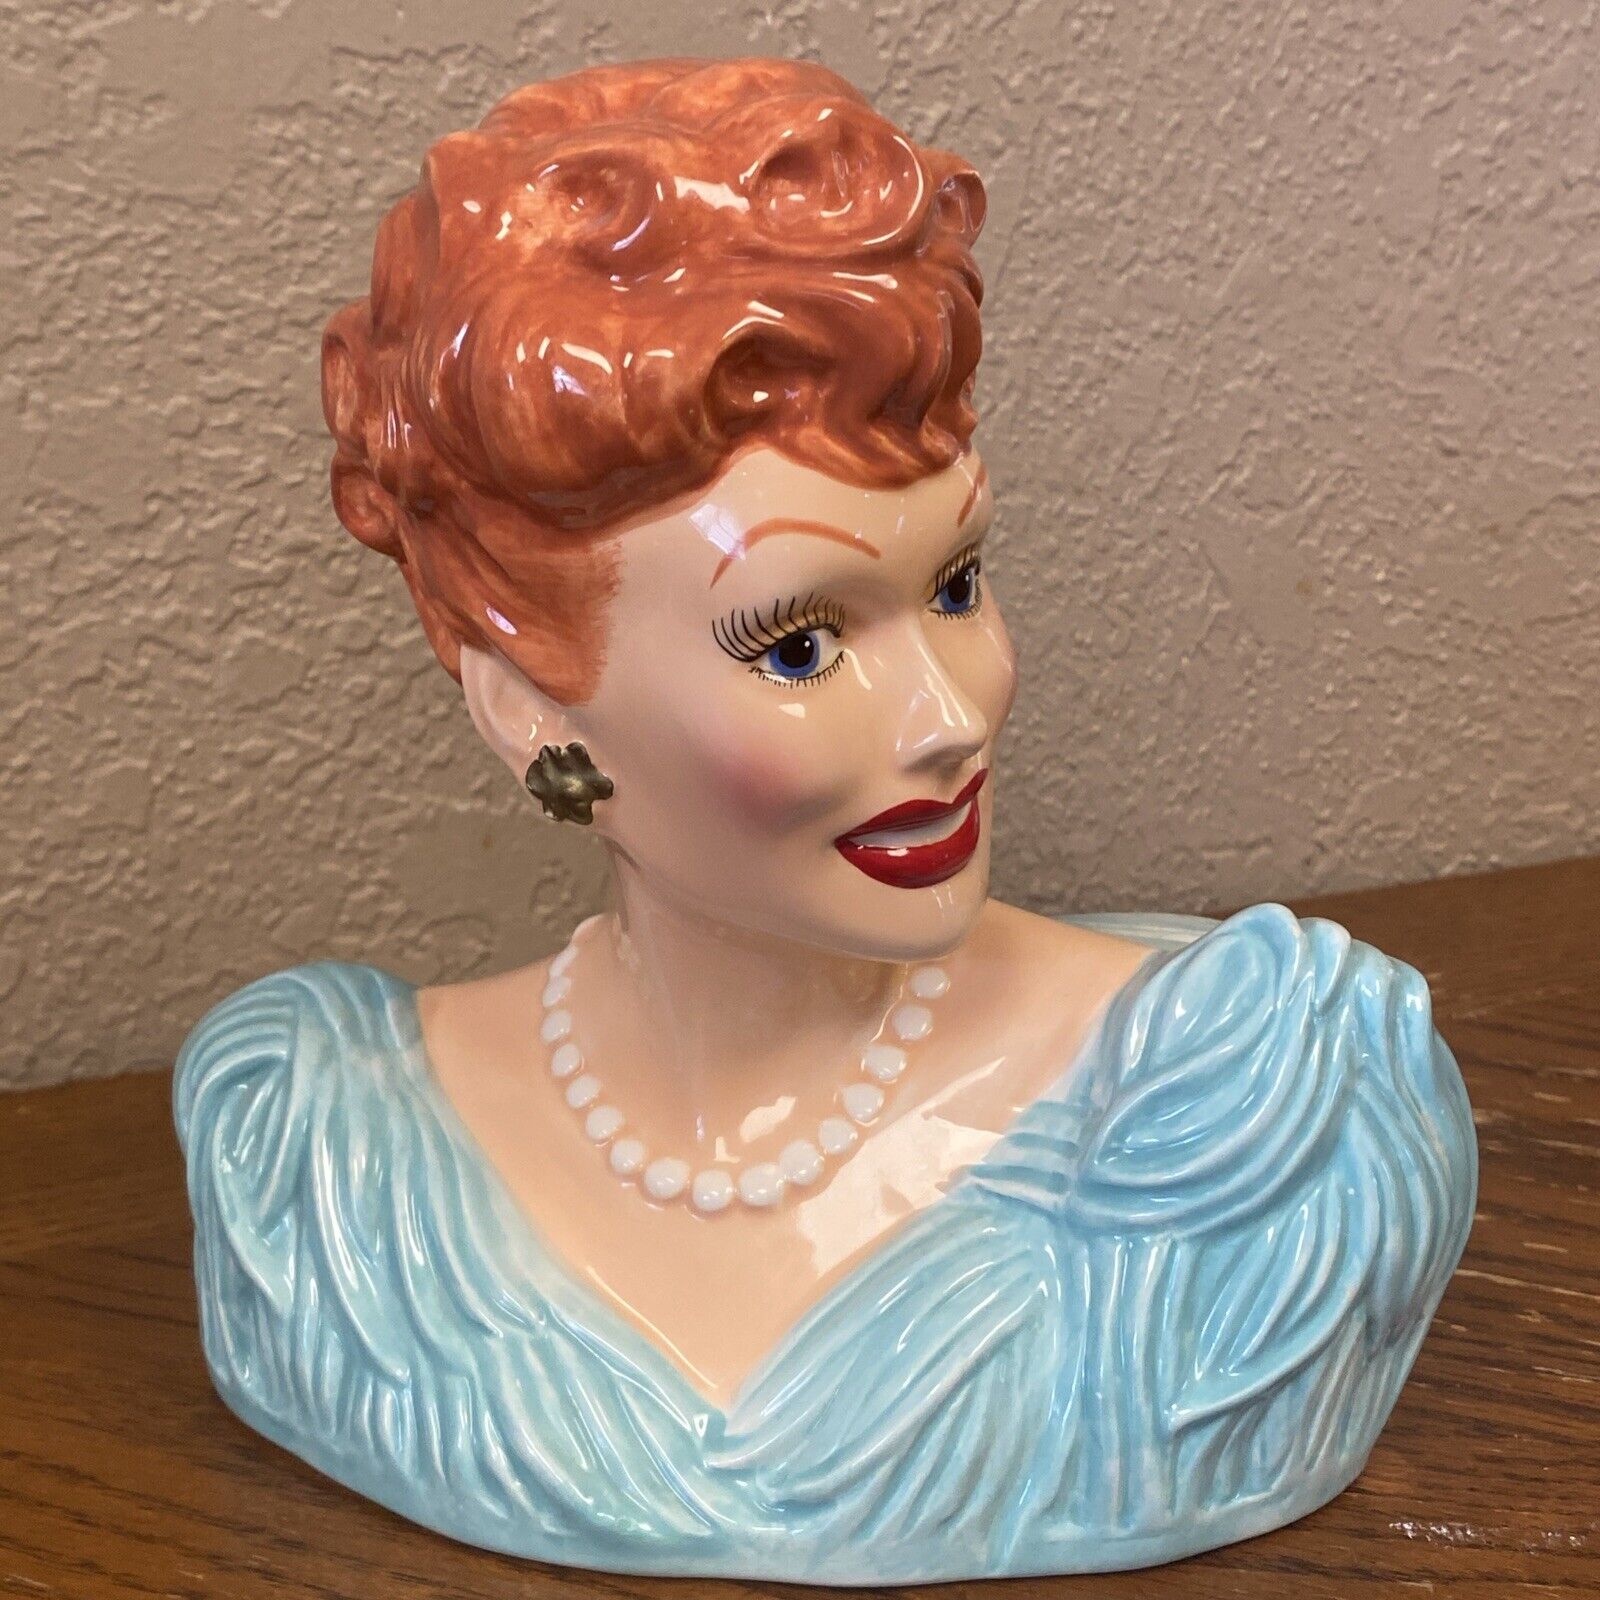 VINTAGE 1996 Lucille Ball Coin Bank Vandor “I Love Lucy” MINT Condition 7x7